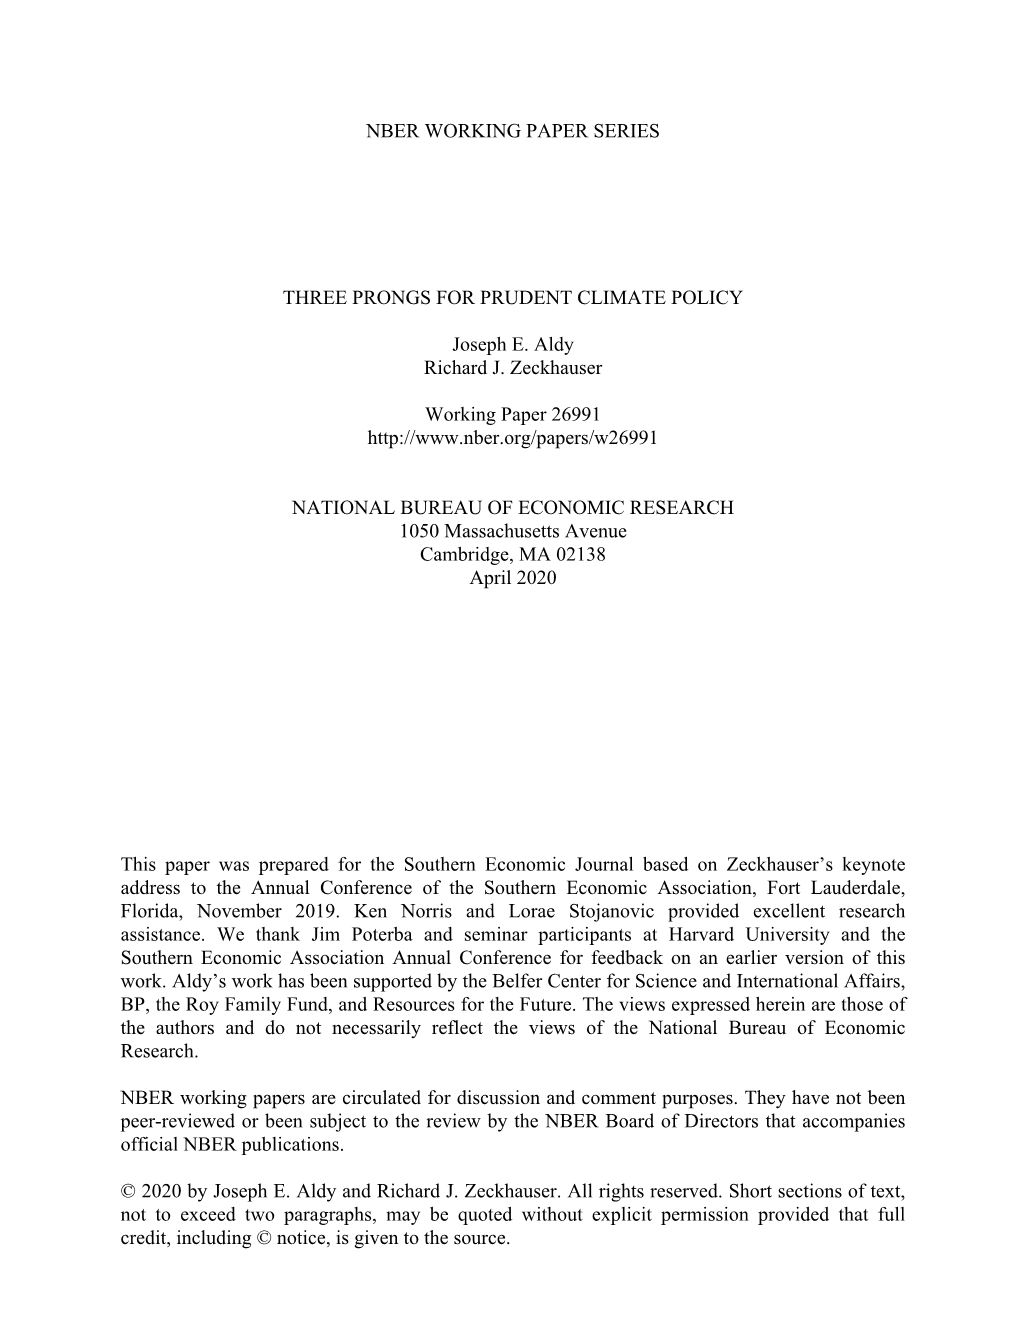 NBER WORKING PAPER SERIES THREE PRONGS for PRUDENT CLIMATE POLICY Joseph E. Aldy Richard J. Zeckhauser Working Paper 26991 Http